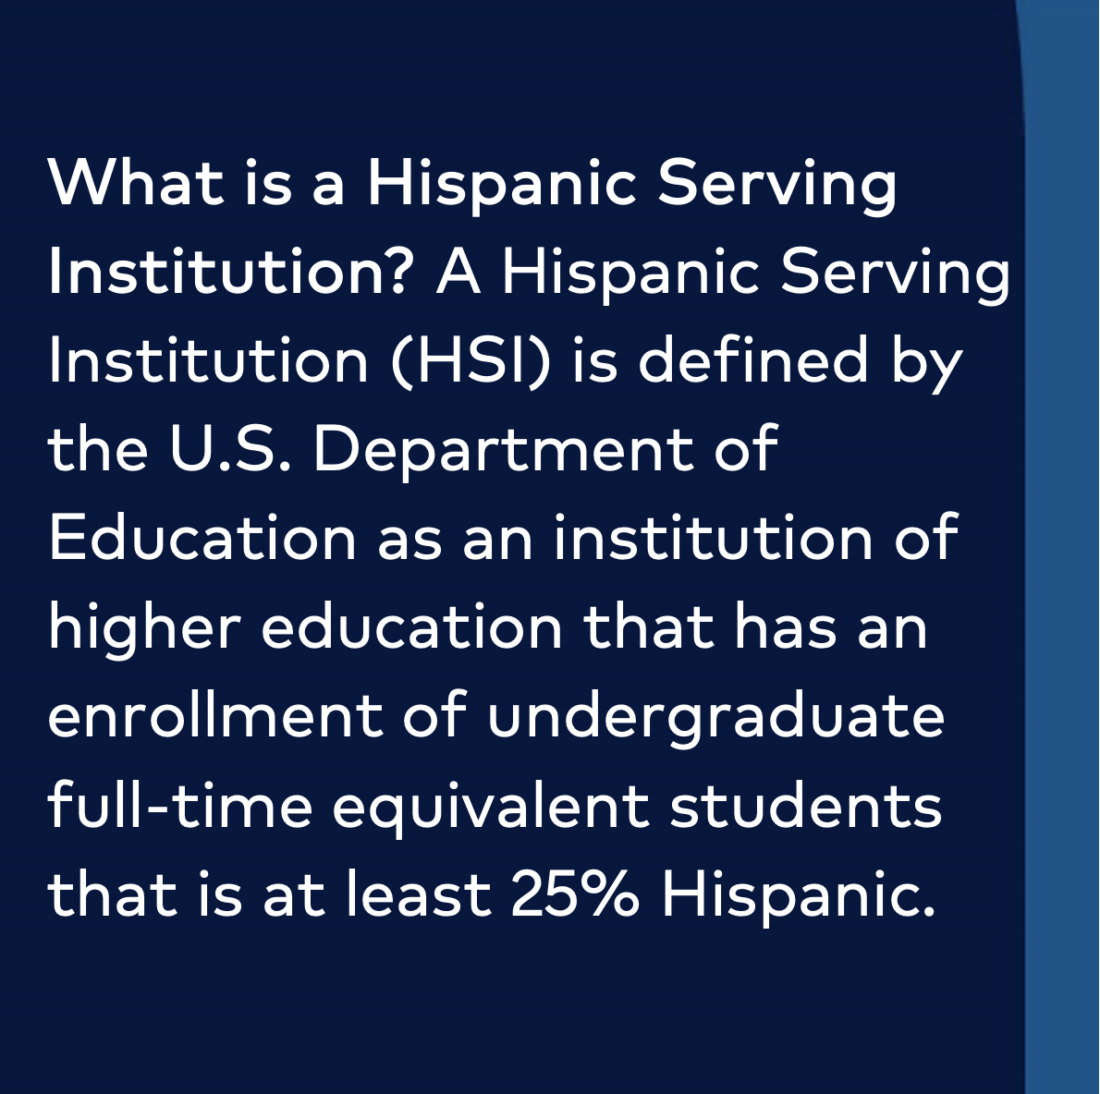 What is a Hispanic Serving Institution? A Hispanic Sering Institution (HSI) is defined by the U.S. Department of Education as an institution of higher education that has an enrollment of undergraduate full-time equivalent students that is at least 25% Hispanic. 